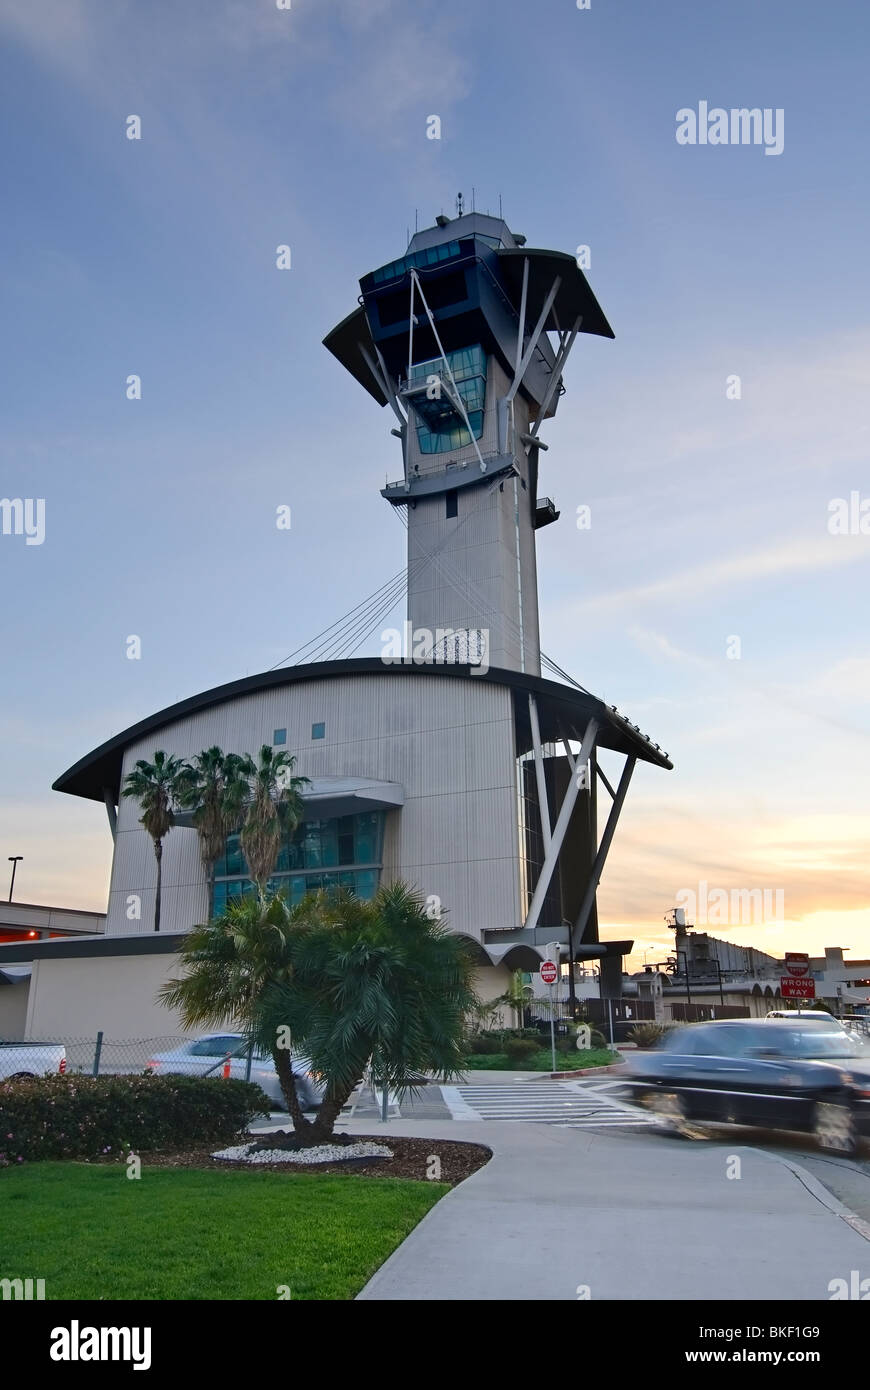 Los Angeles International Airport's air traffic control tower designed by architect Kate Diamond. Stock Photo